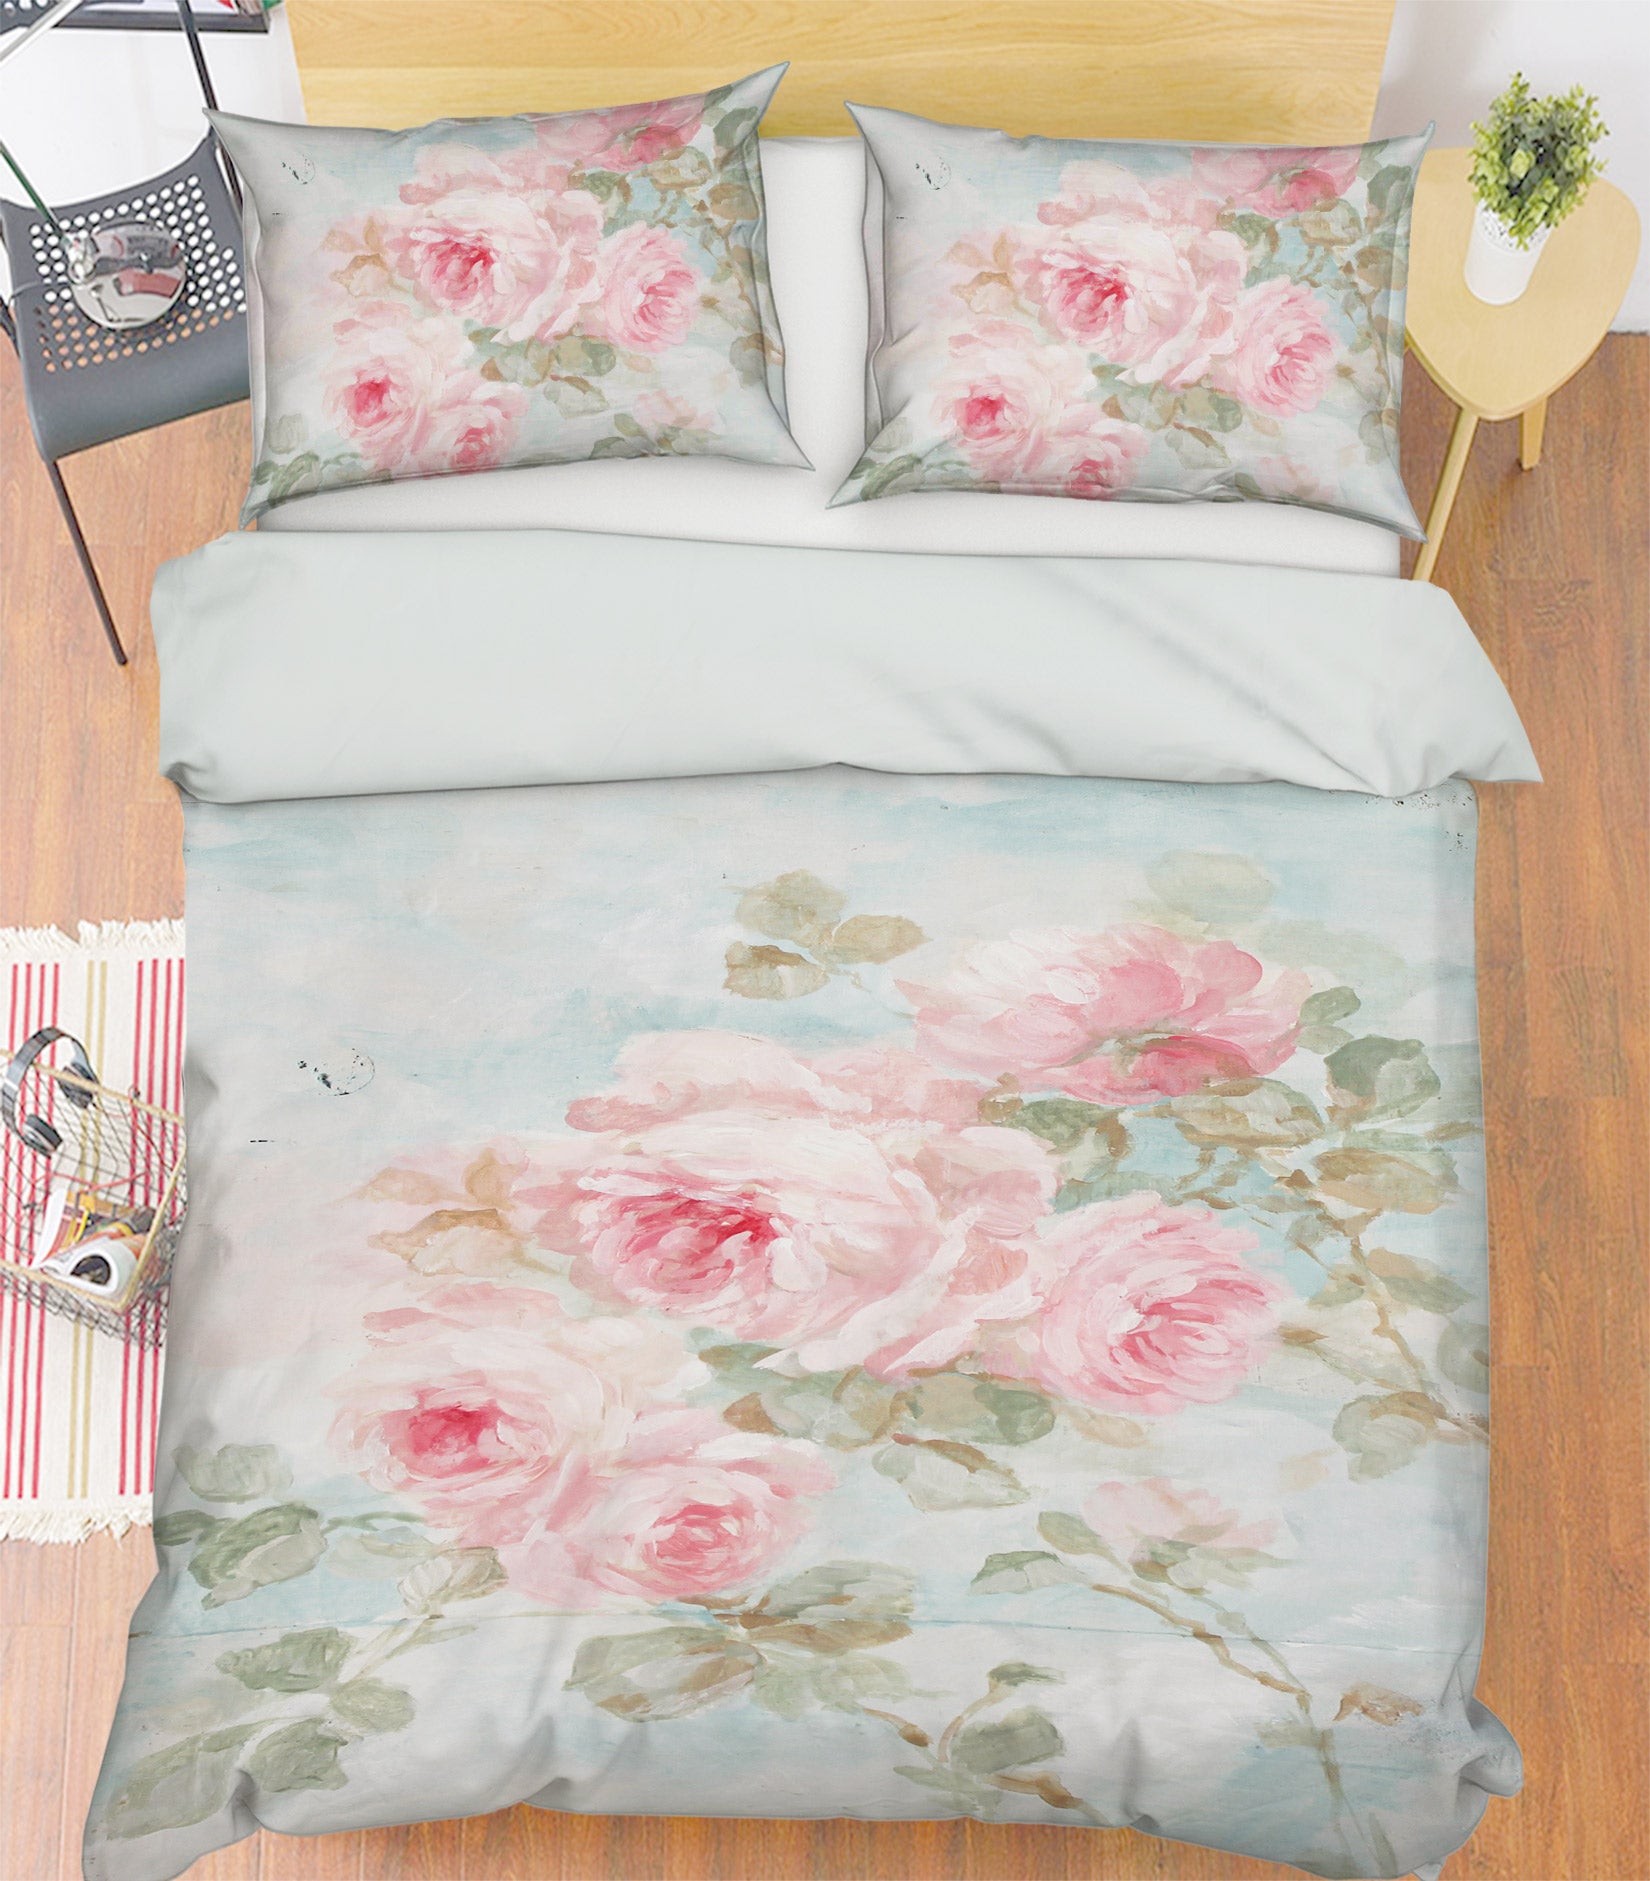 3D Pink Flower Branch 2098 Debi Coules Bedding Bed Pillowcases Quilt